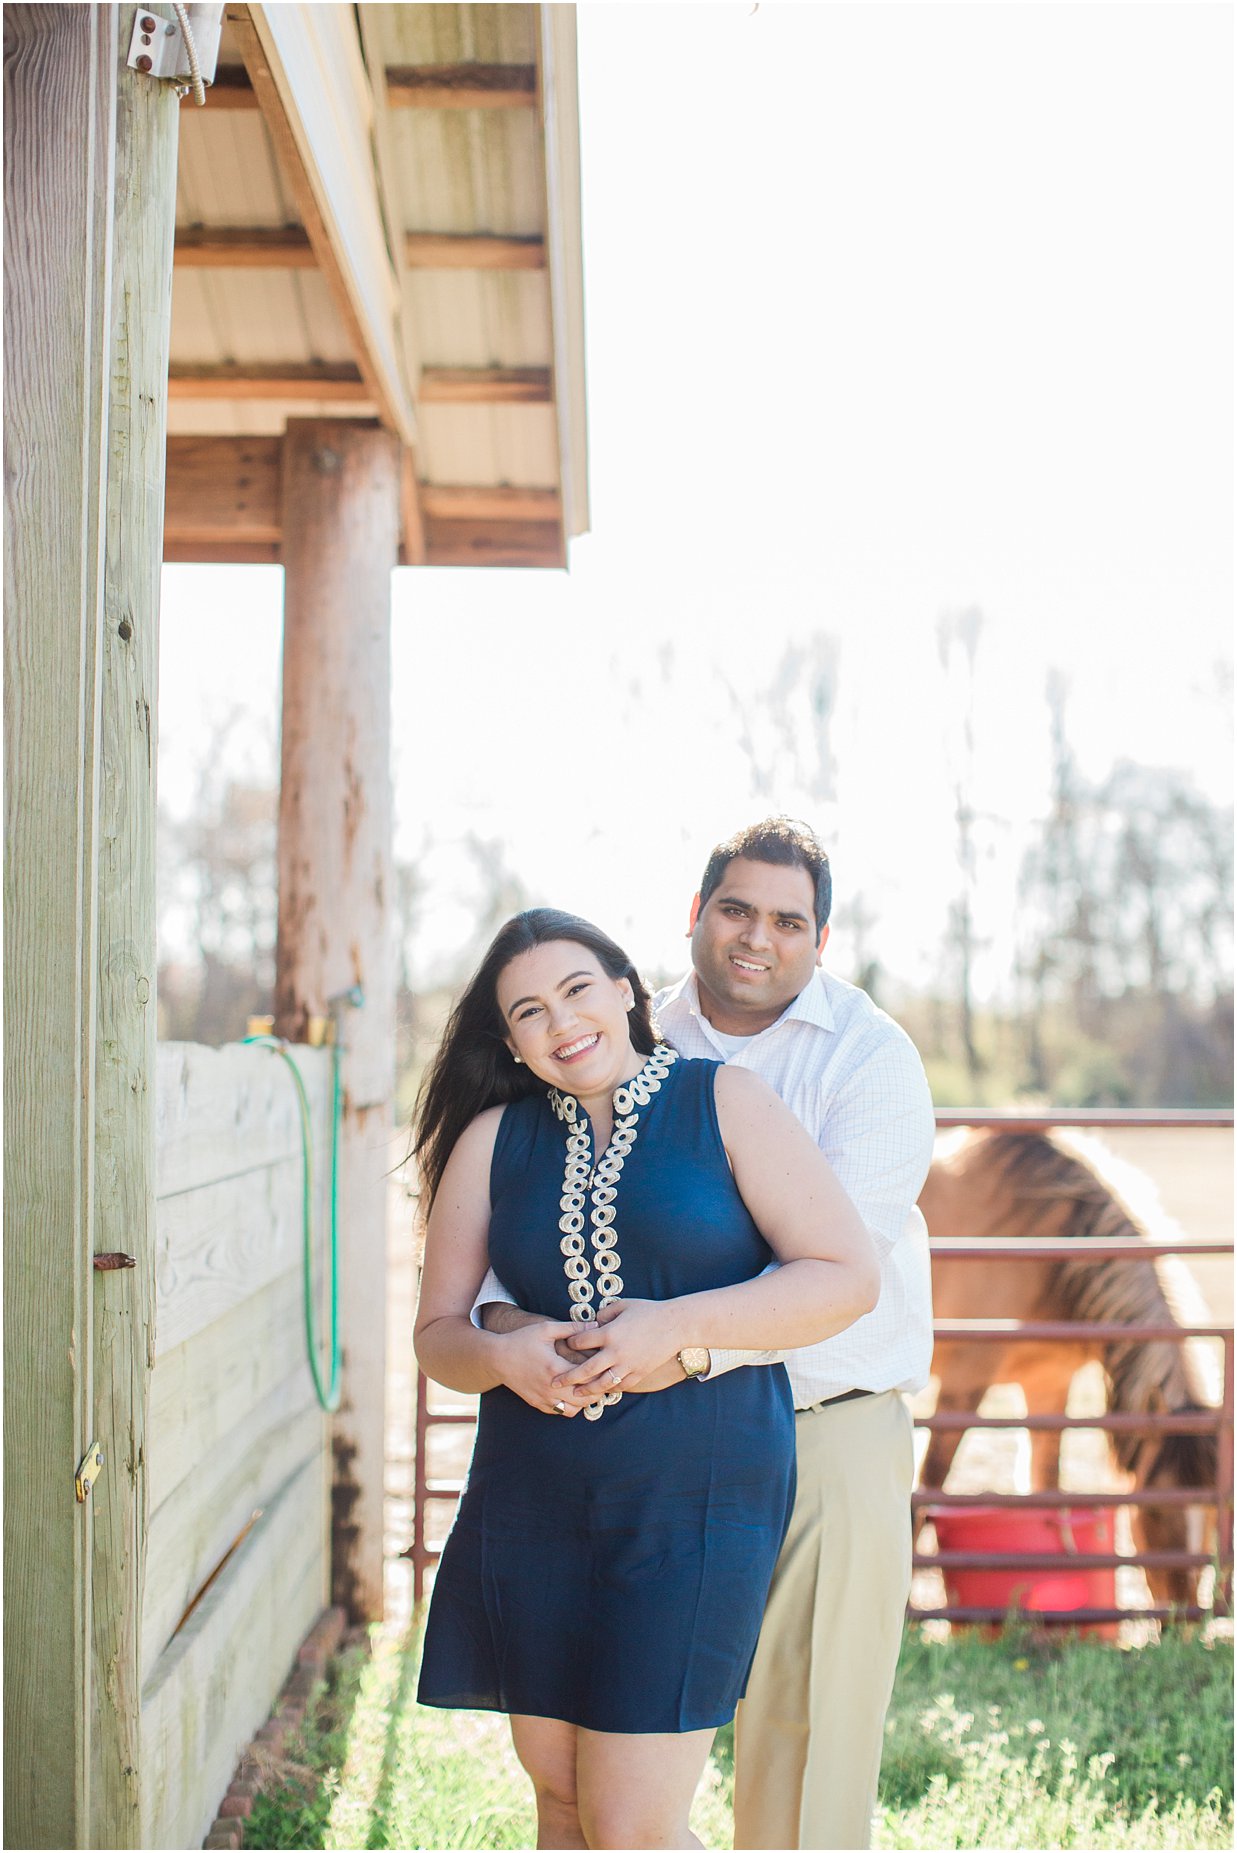 engagement photos with horses 